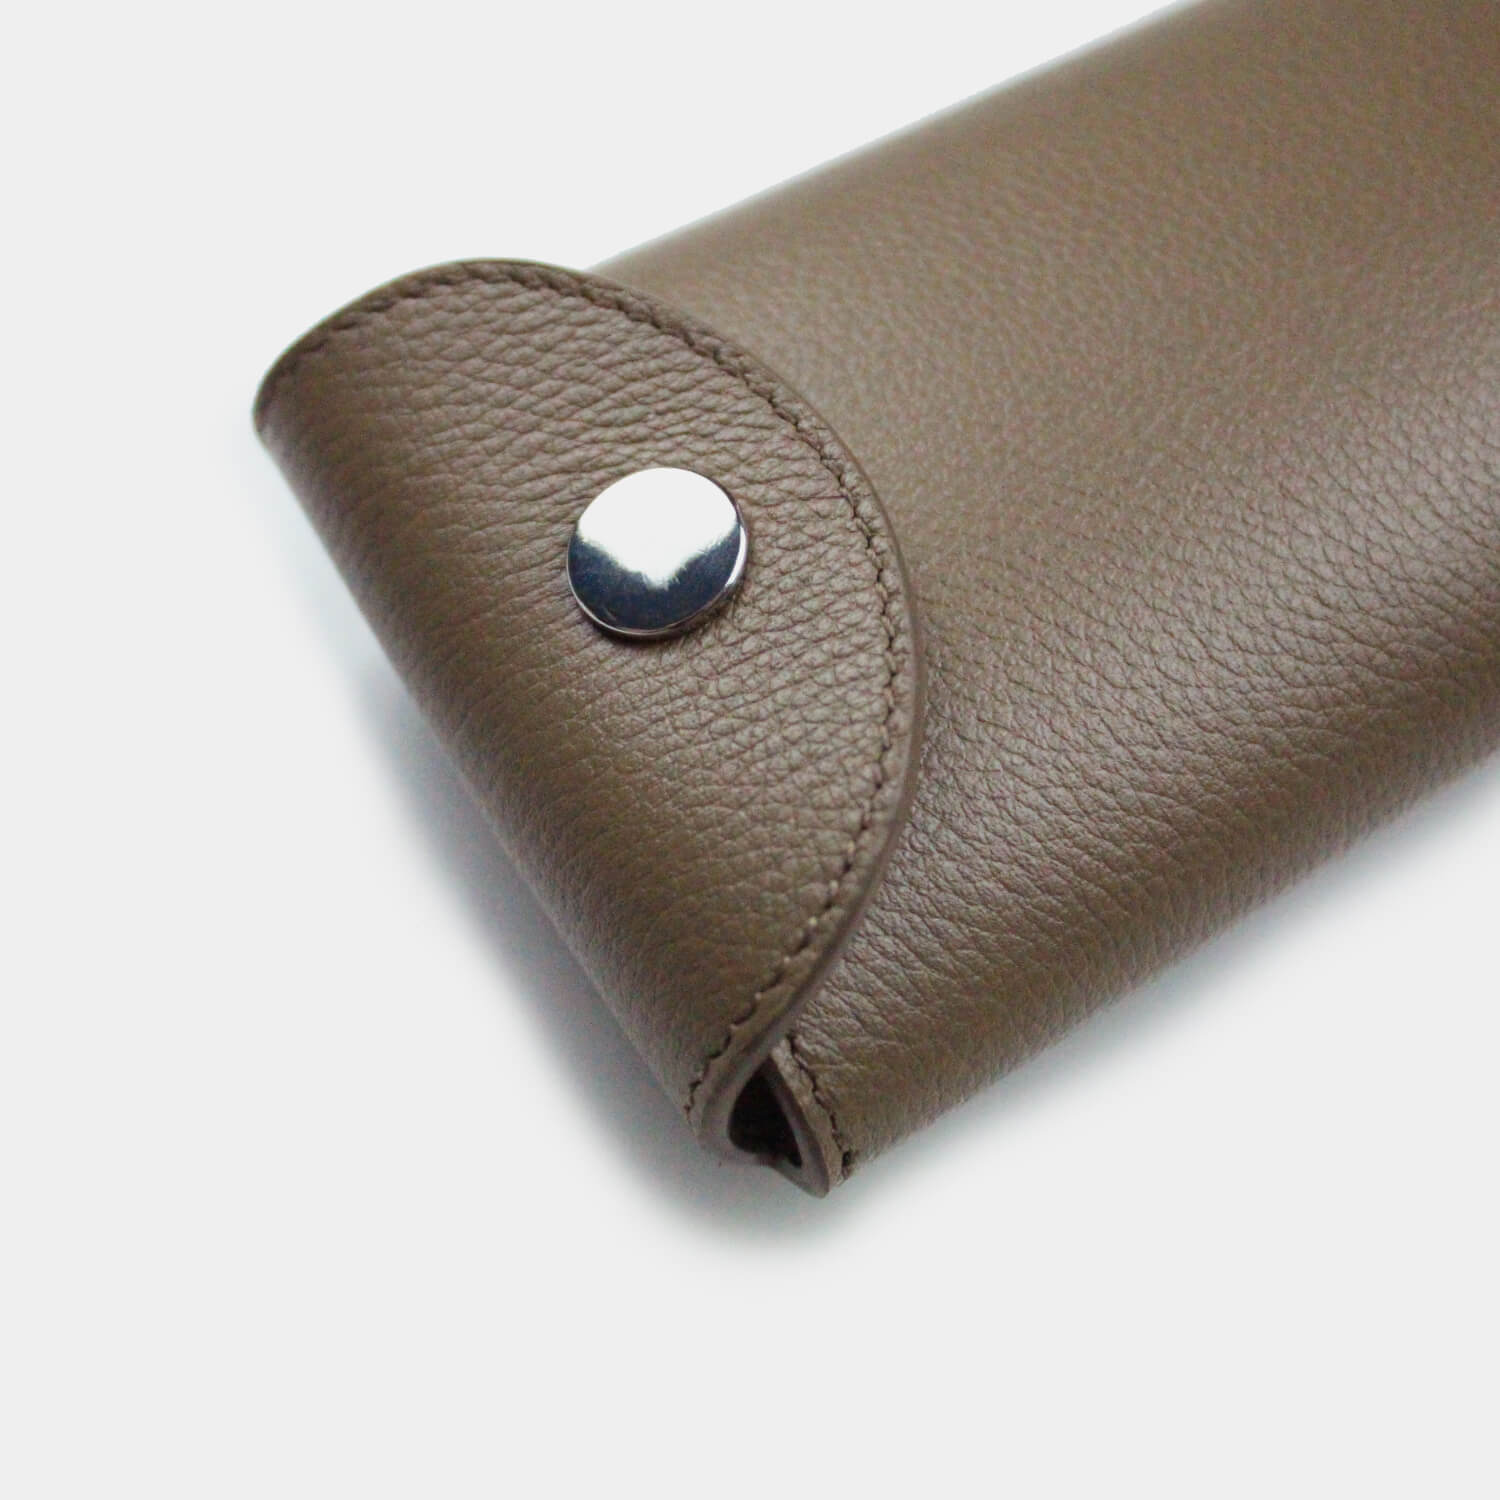 Fine grain leather glasses case with 3 poppers to open to protect and store, branded with your company logo